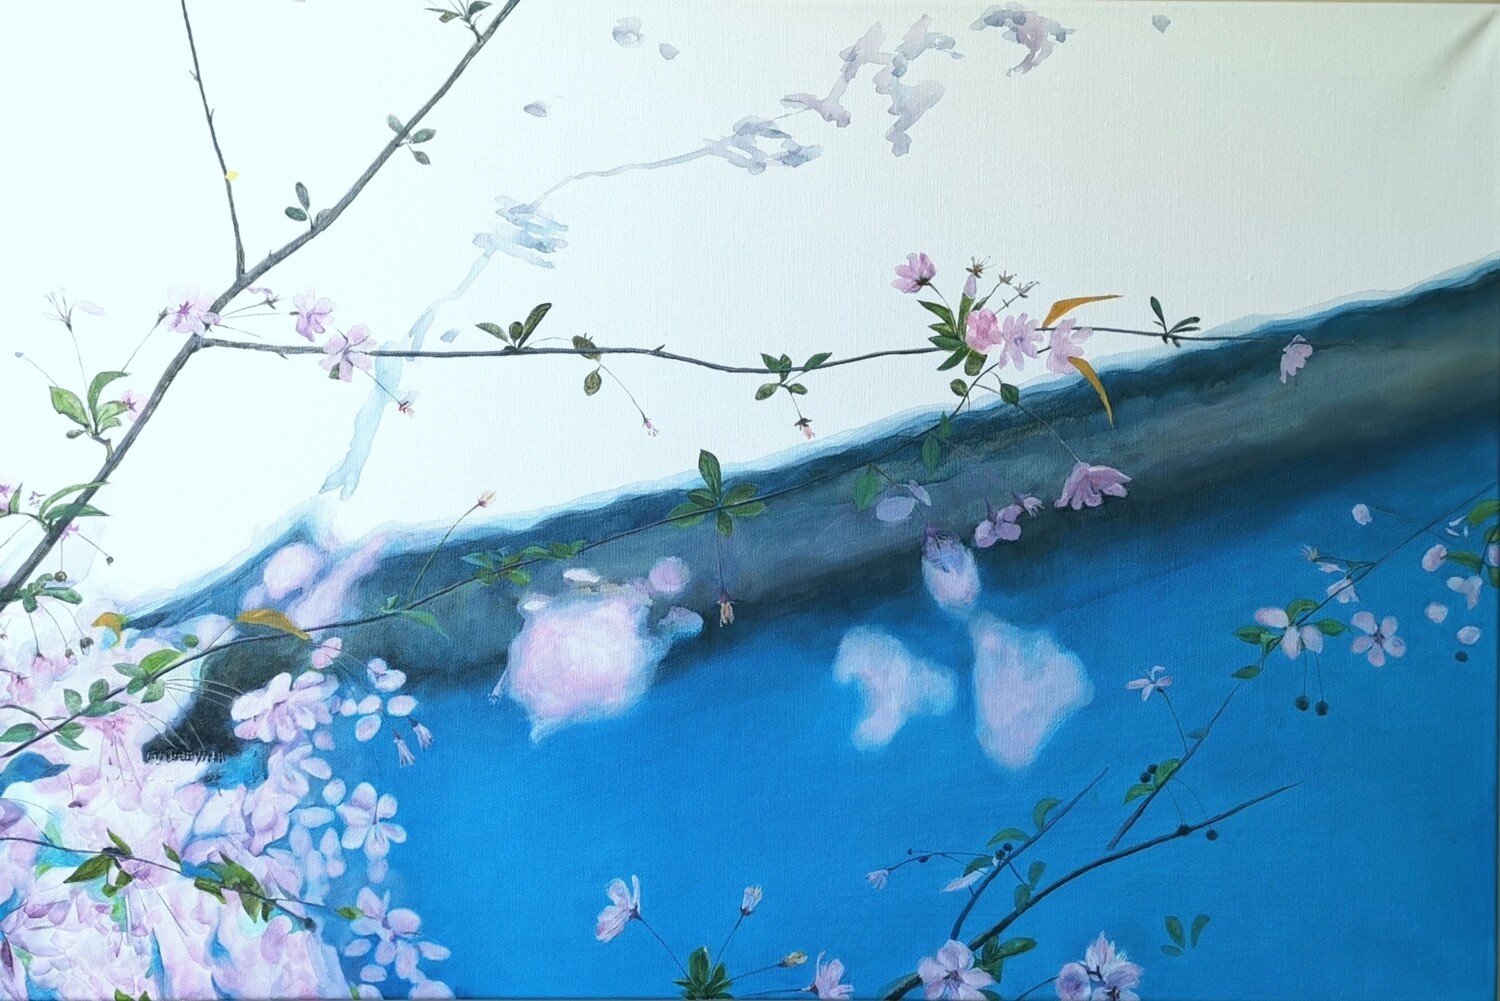 Swaying in Spring (春风摇曳)